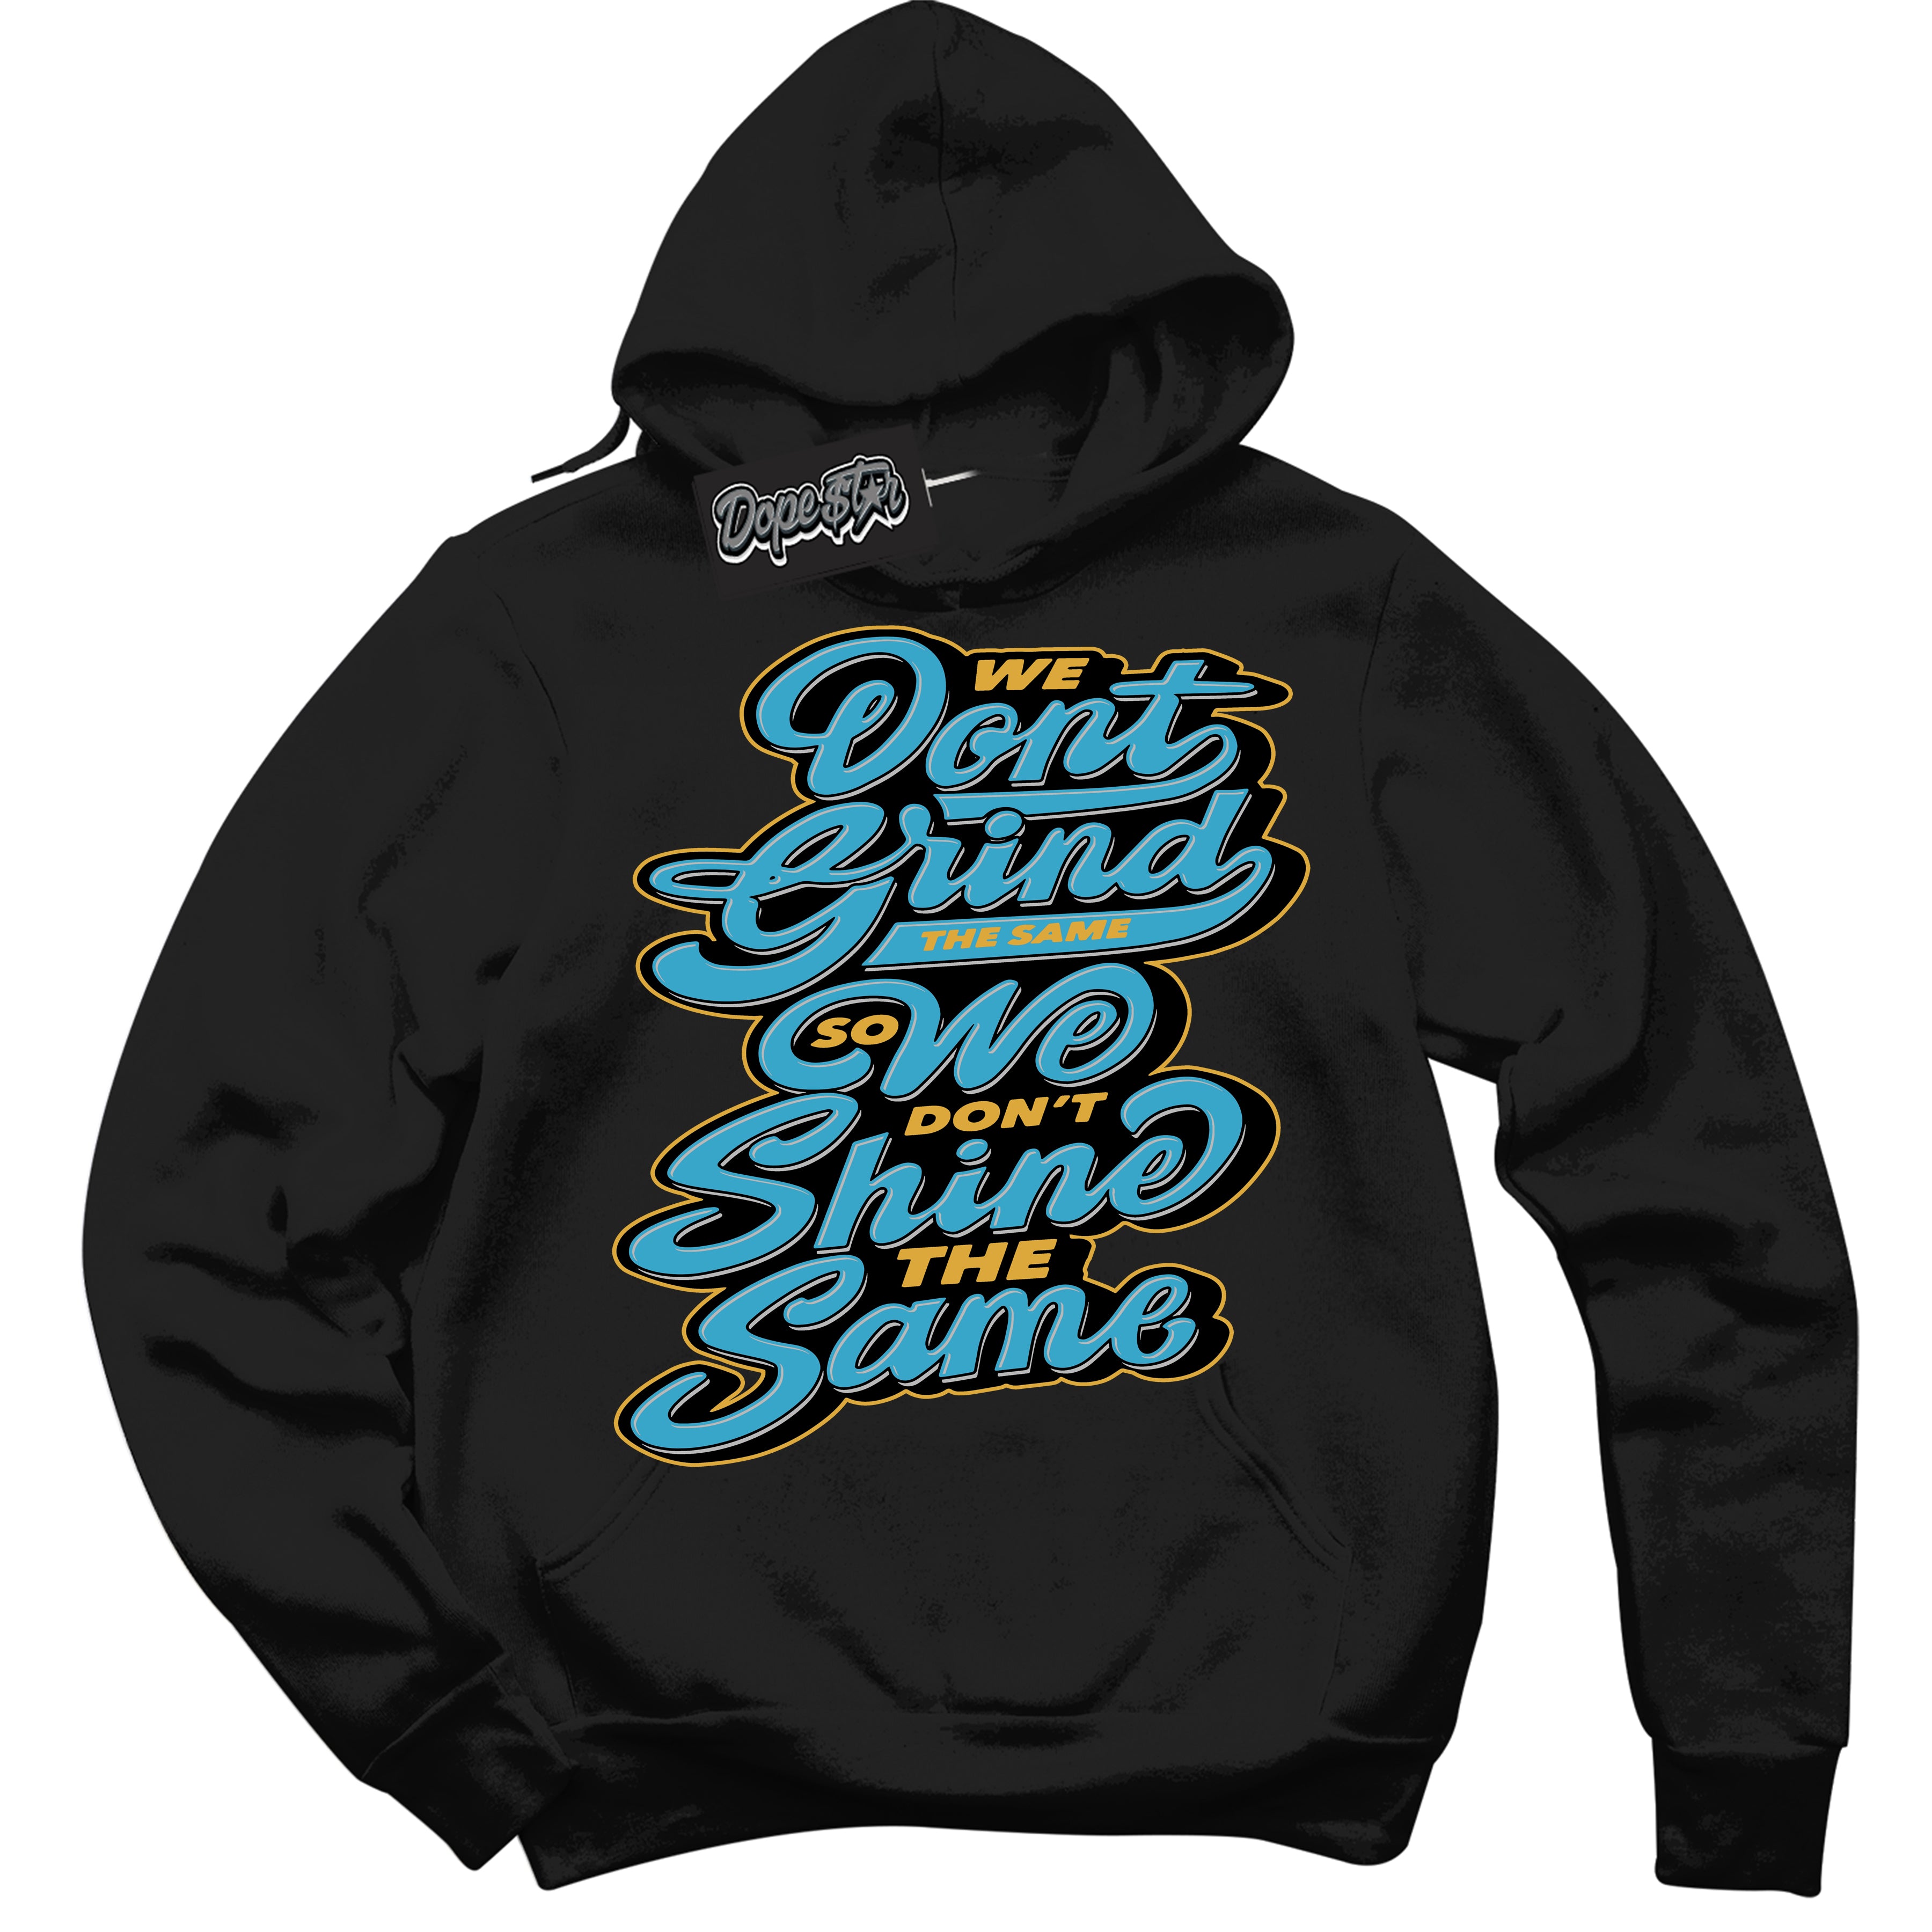 Cool Black Hoodie with “ Grind Shine ”  design that Perfectly Matches Aqua 5s Sneakers.